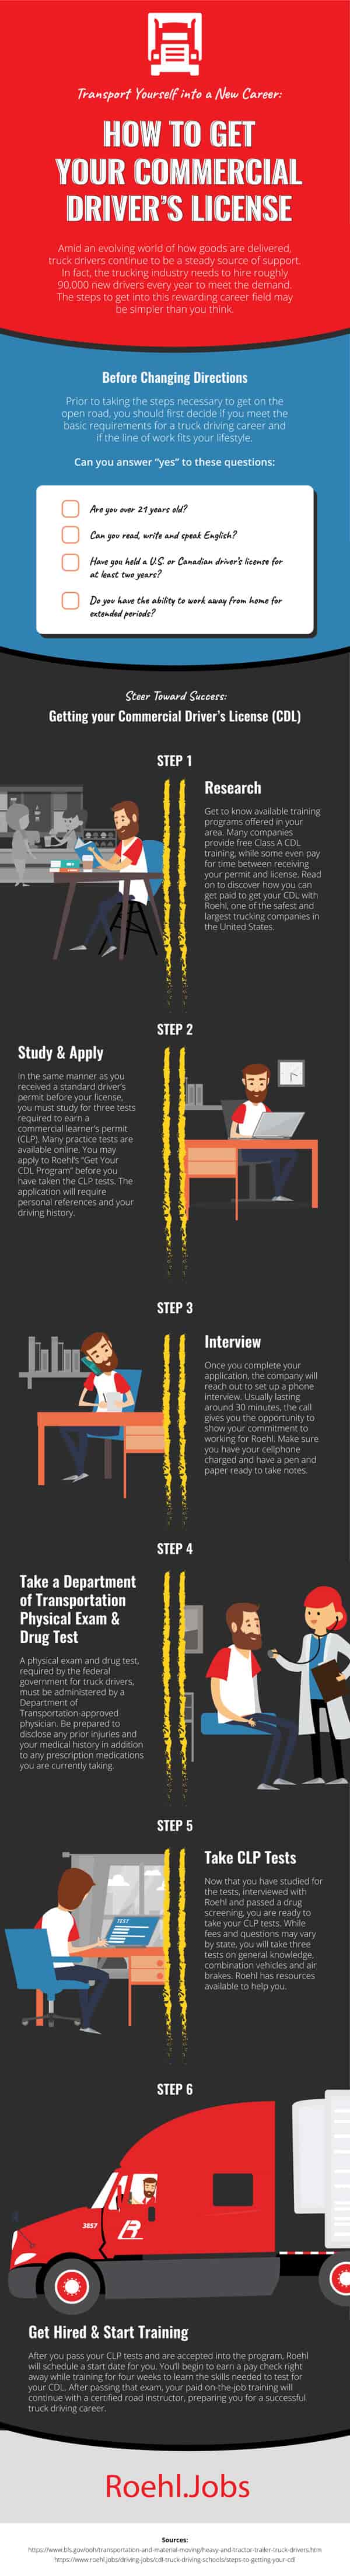 How to get your CDL infographic